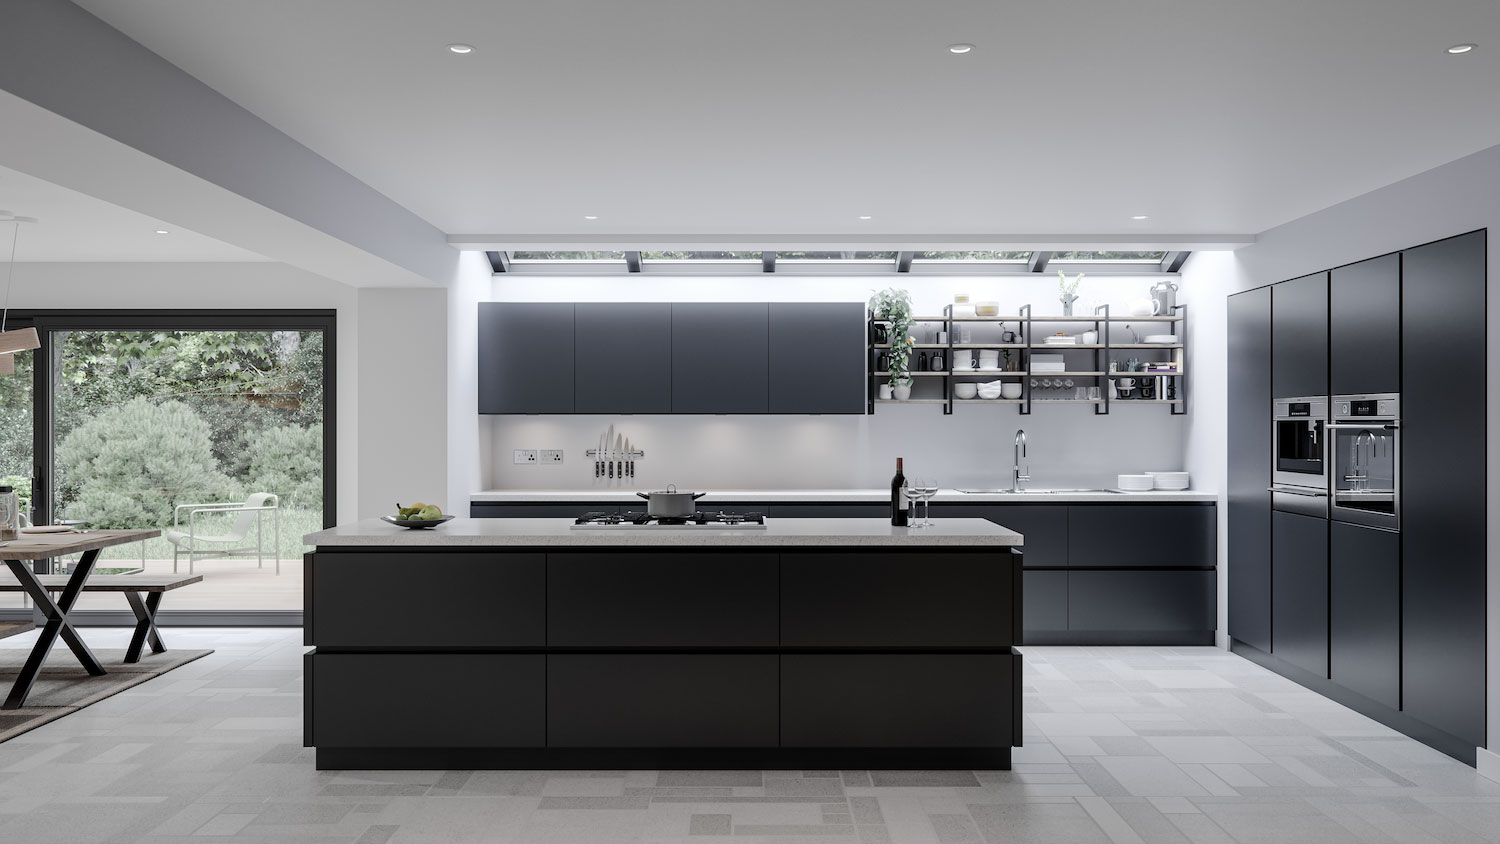 Matte Graphite Grey LINEA Kitchen with a white chromix Island, is shown here in this Contemporary & Modern design. Stainless steel appliances, keep the lines clean and sleek. The full design is handleless and super modern. YouK metal open shelving adds an industrial feel to this design by The Kitchen Depot. Dark colour pallettes